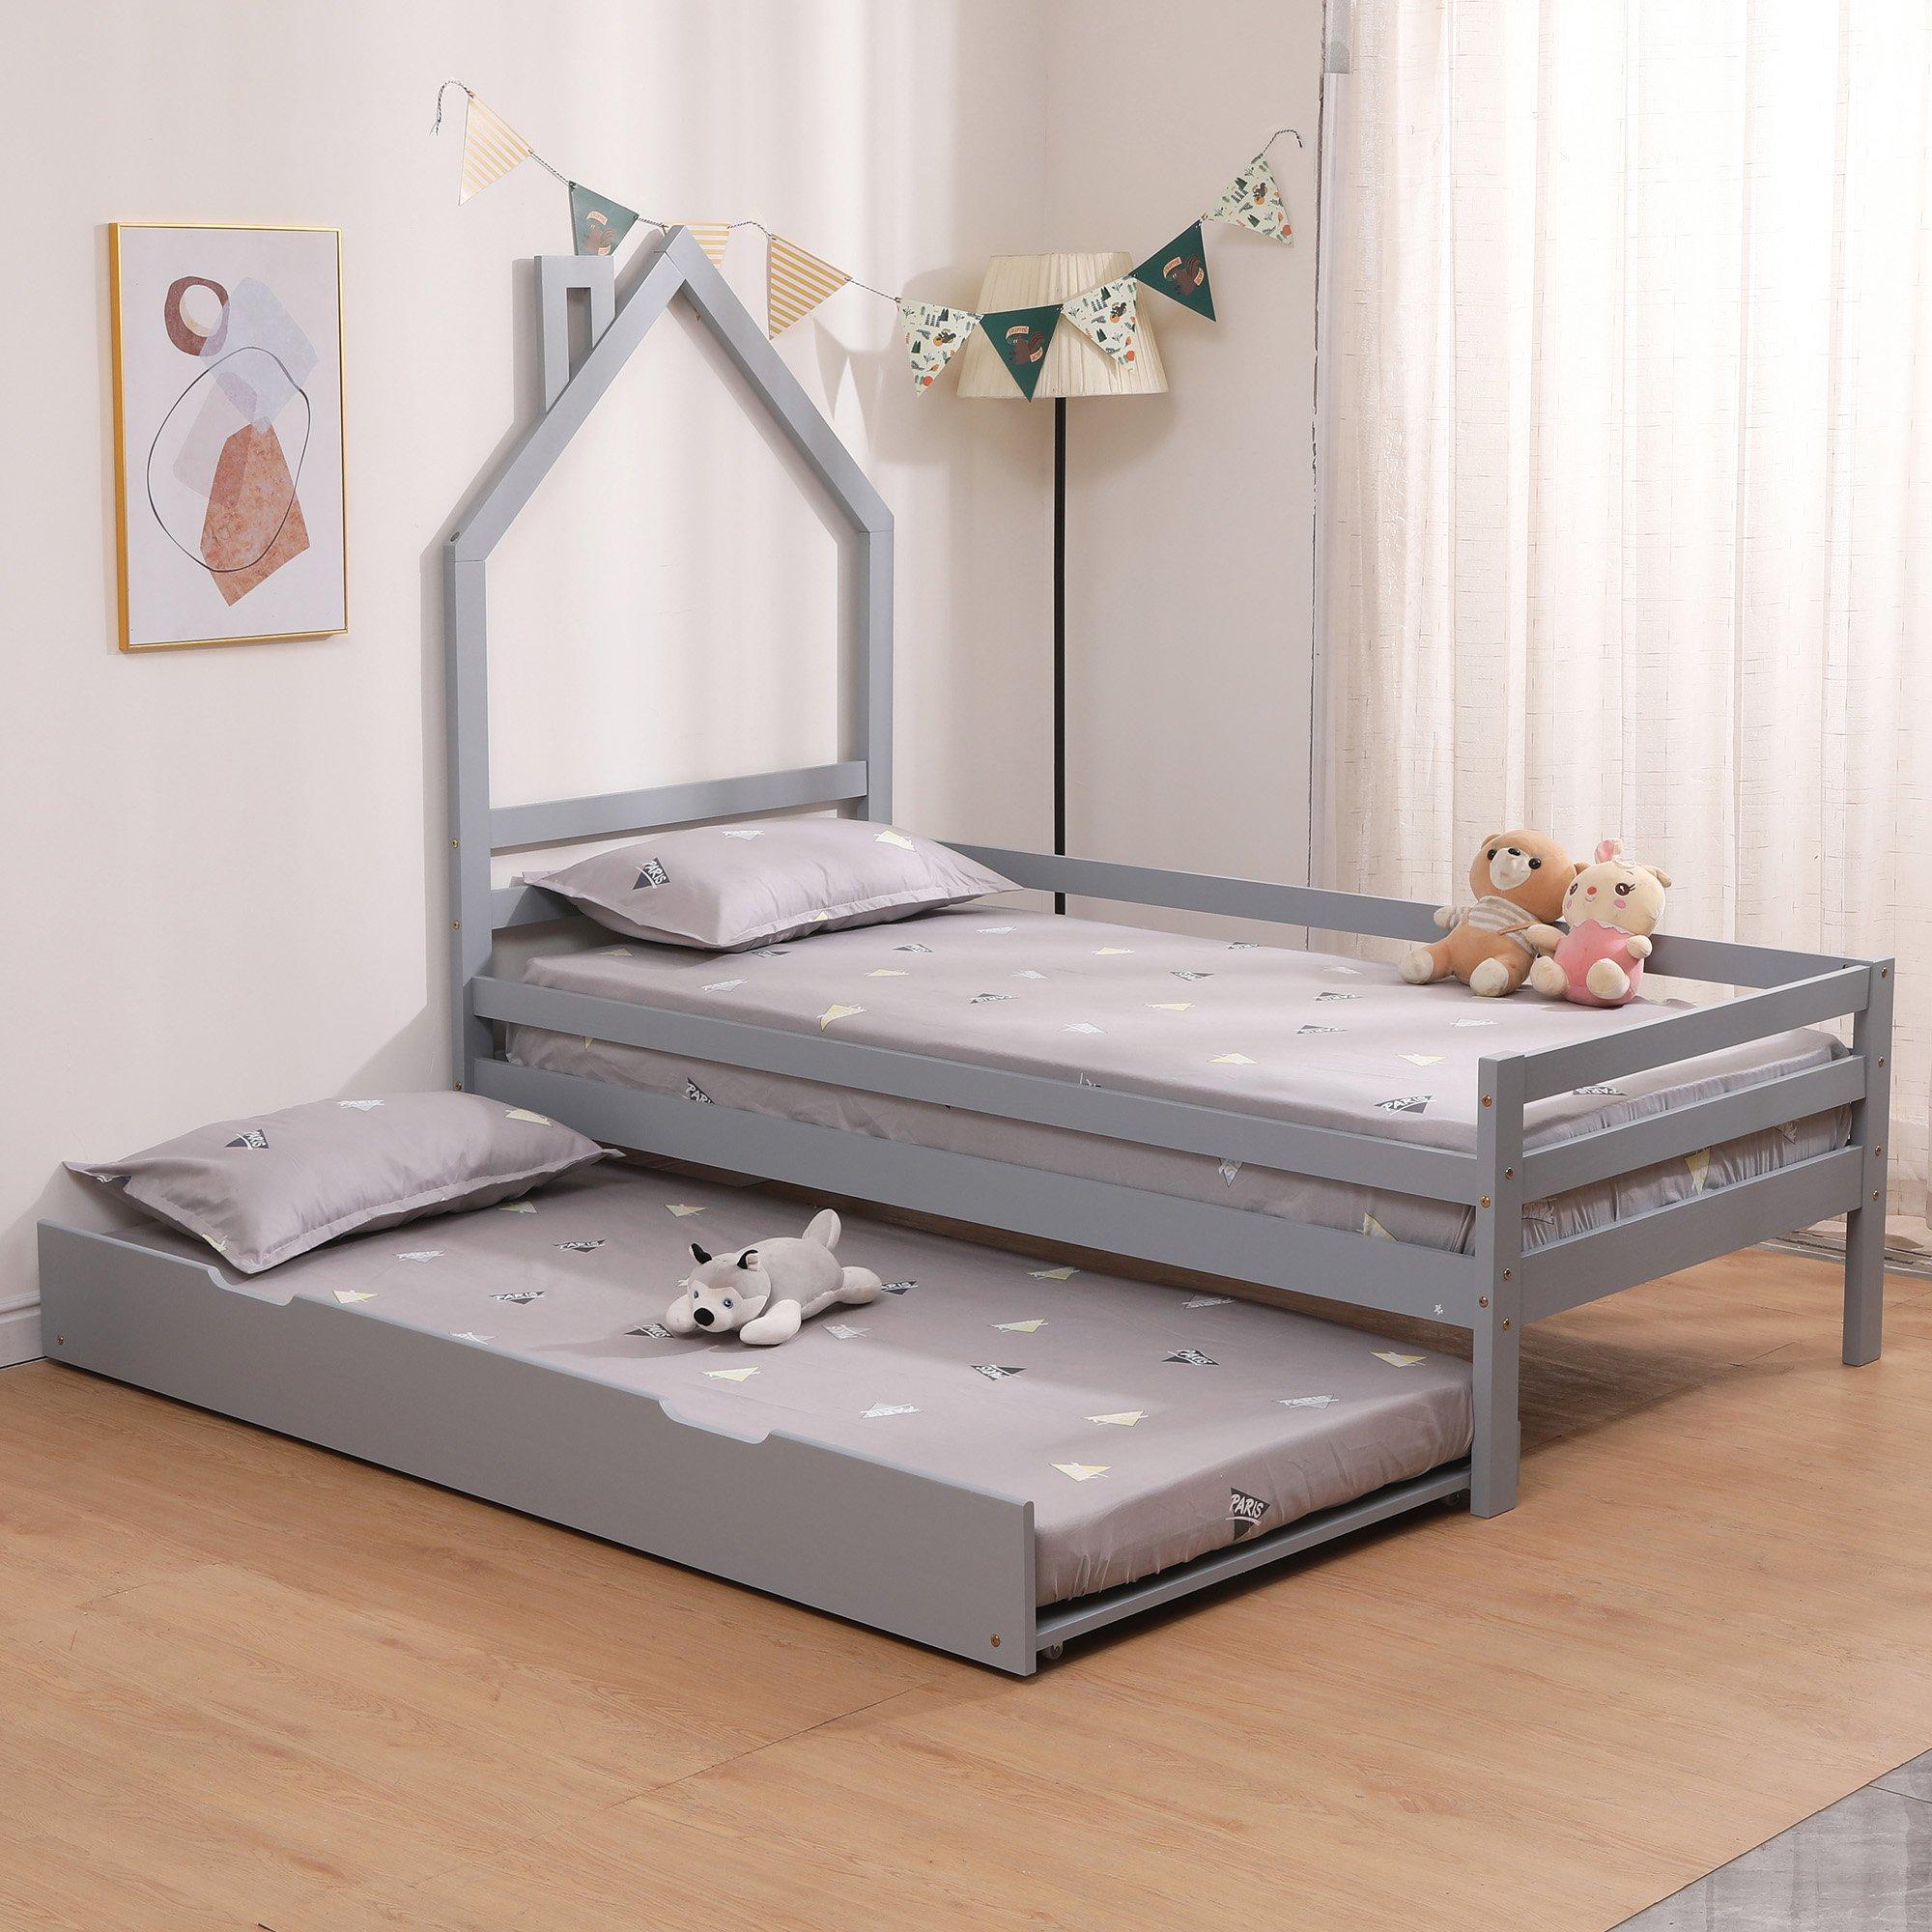 Theo Kids Childrens Wooden House Single Bed Frame with Guest Trundle